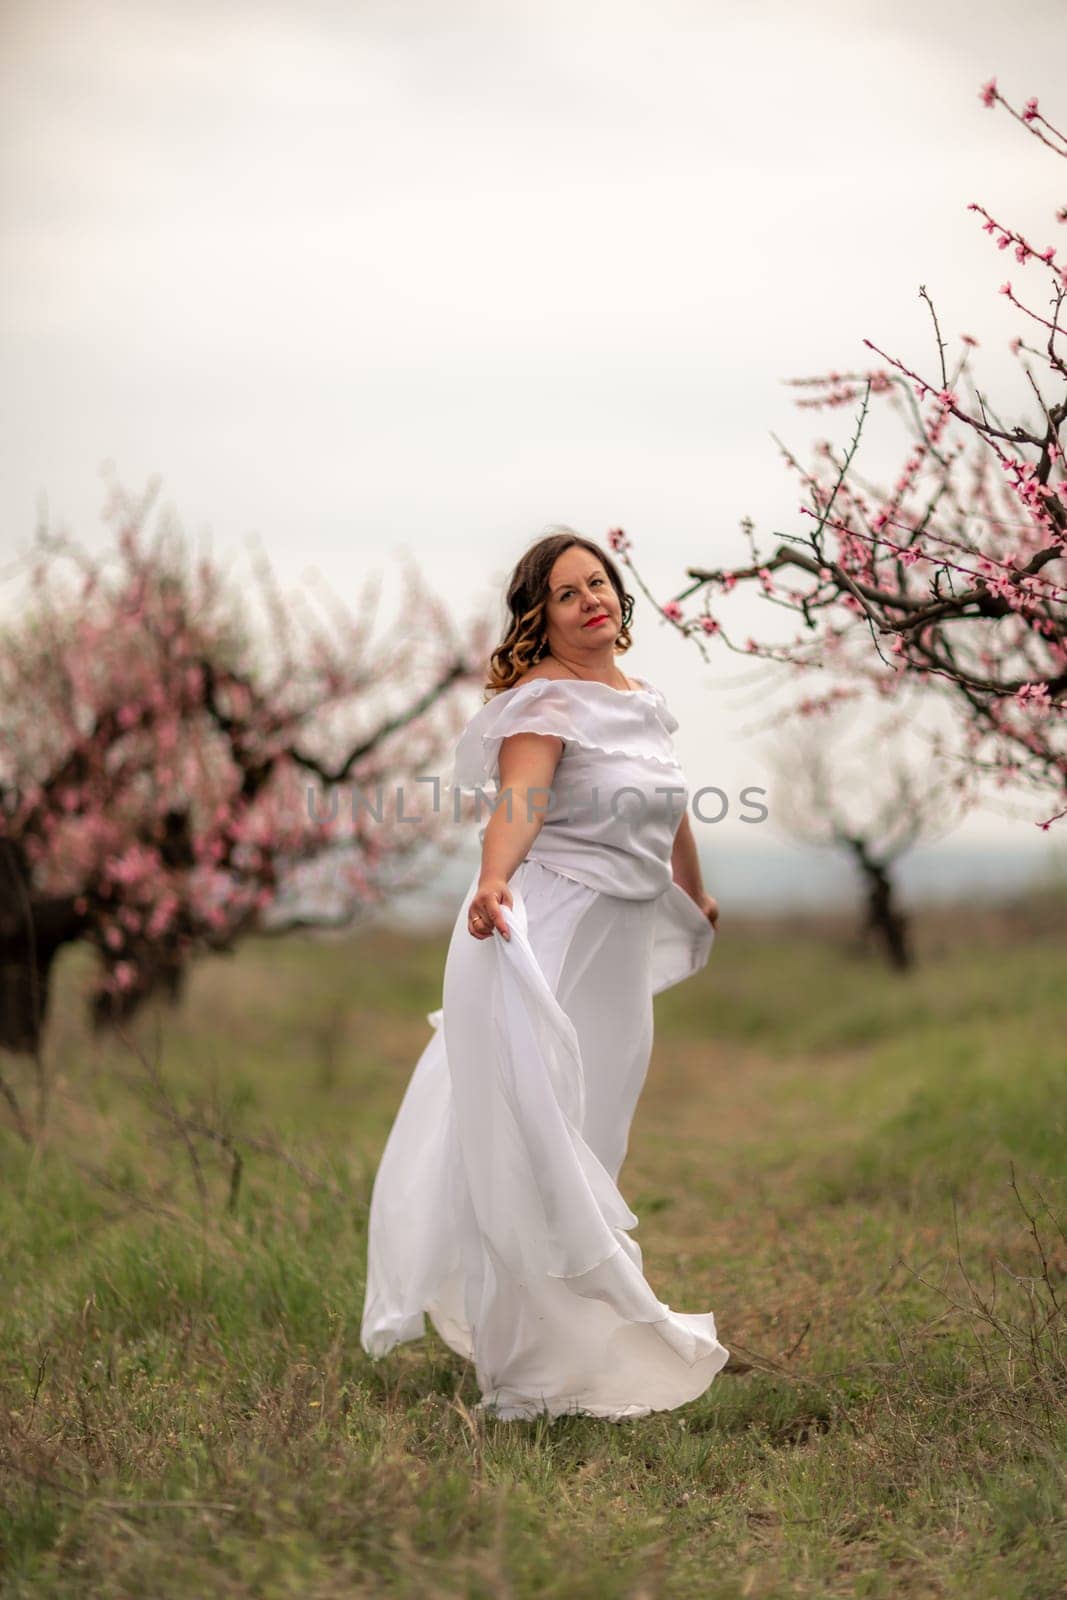 Woman peach blossom. Happy woman in white dress walking in the garden of blossoming peach trees in spring.